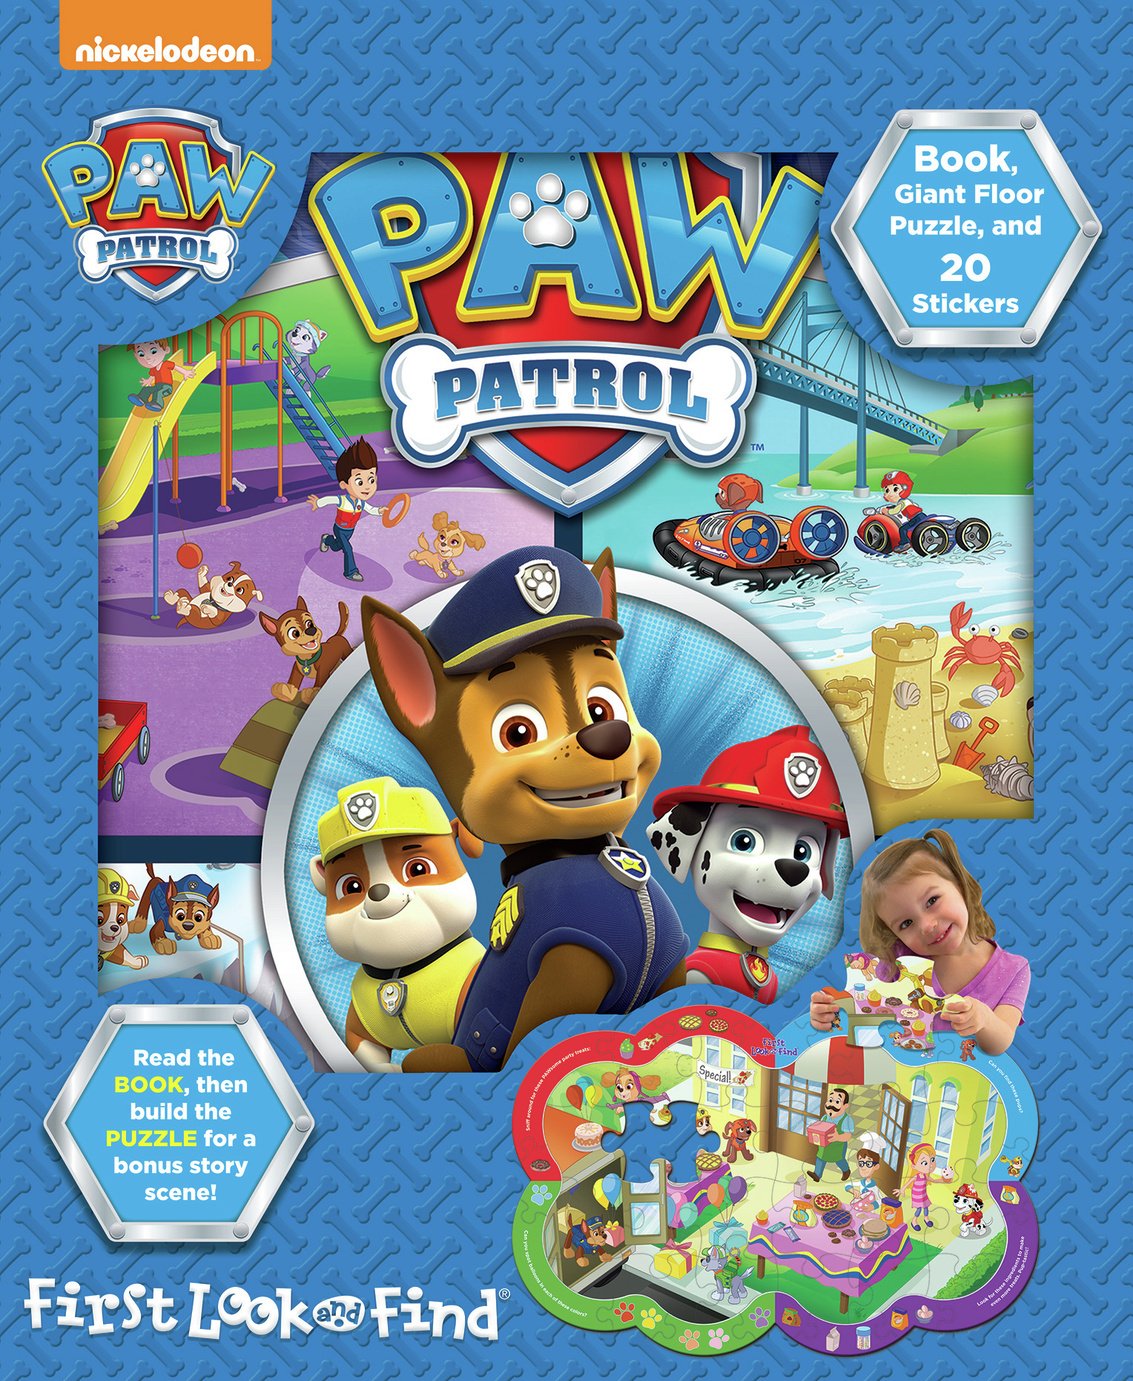 Nickelodeon PAW Patrol Look and Find Giant Puzzle